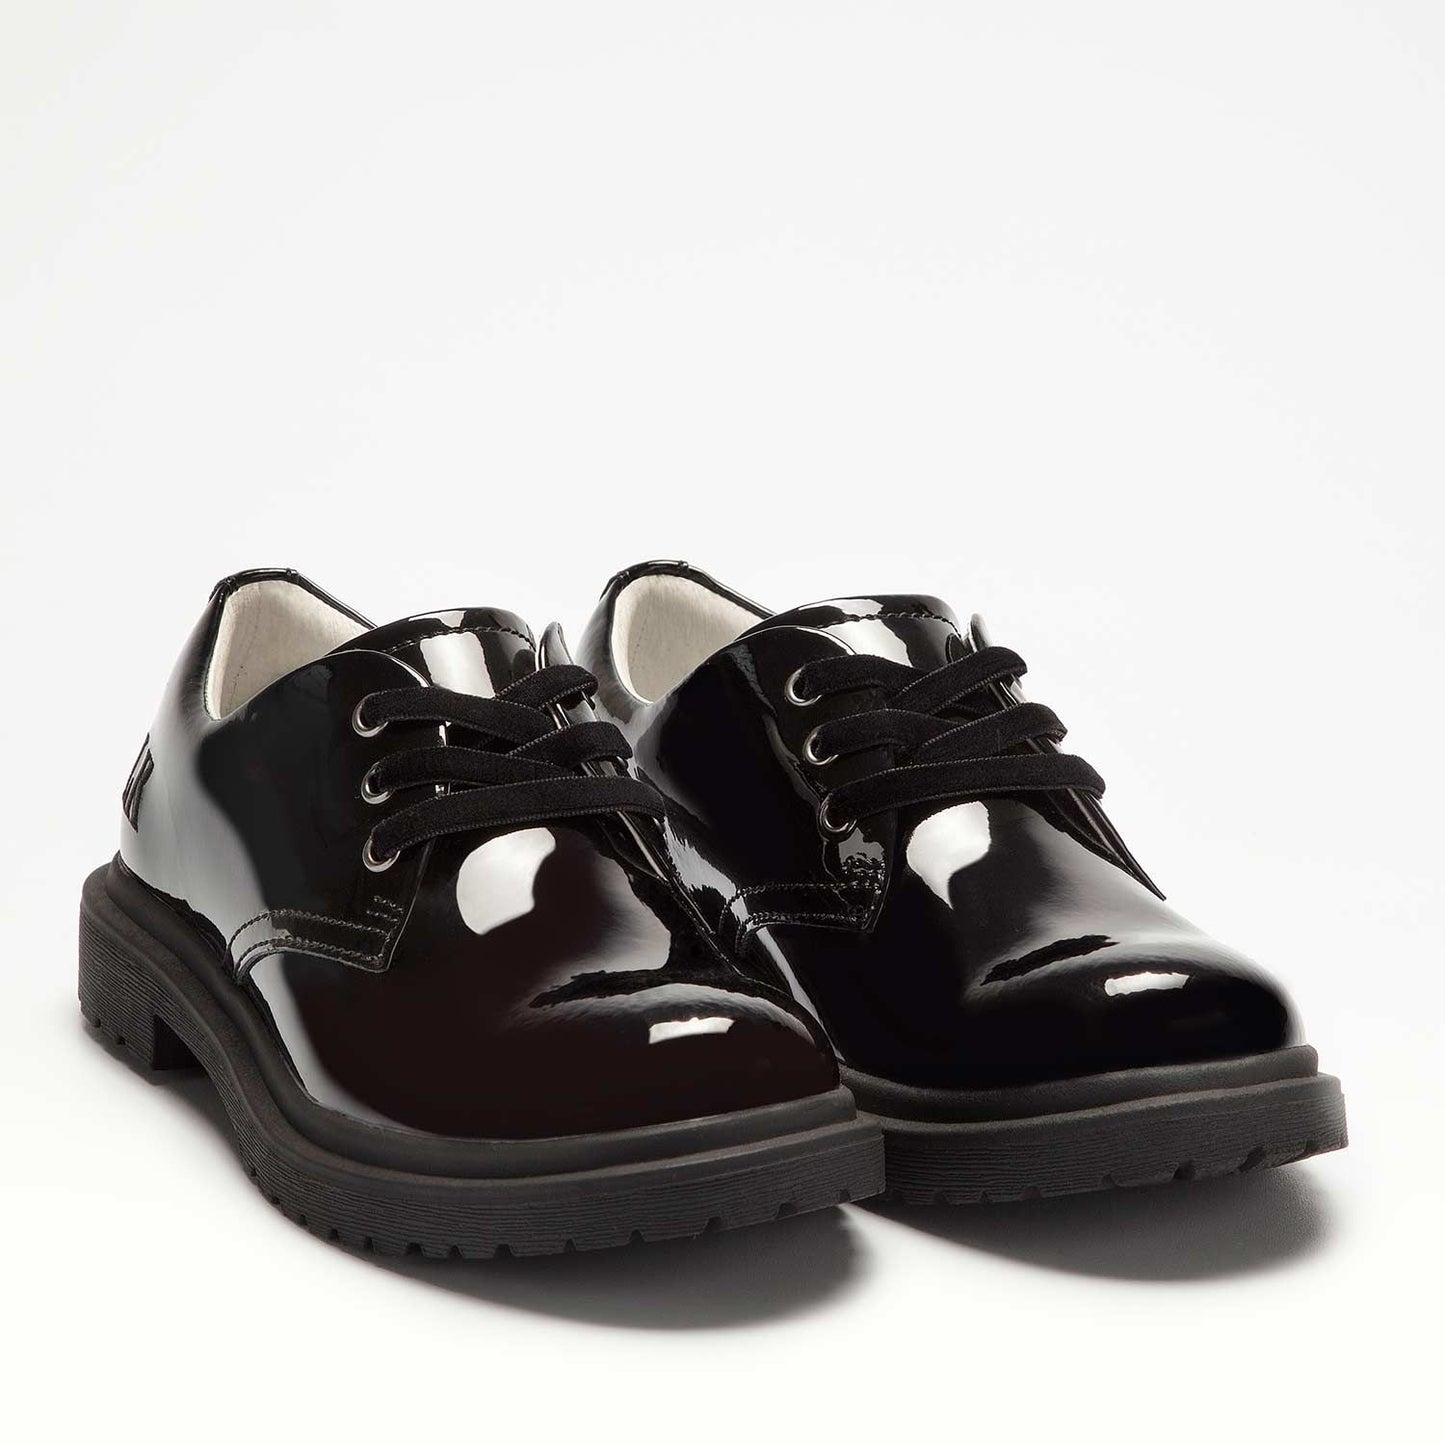 A pair of girls school shoe by Lelli Kelly, style Elaine, in black patent with lace fastening. Right side view.